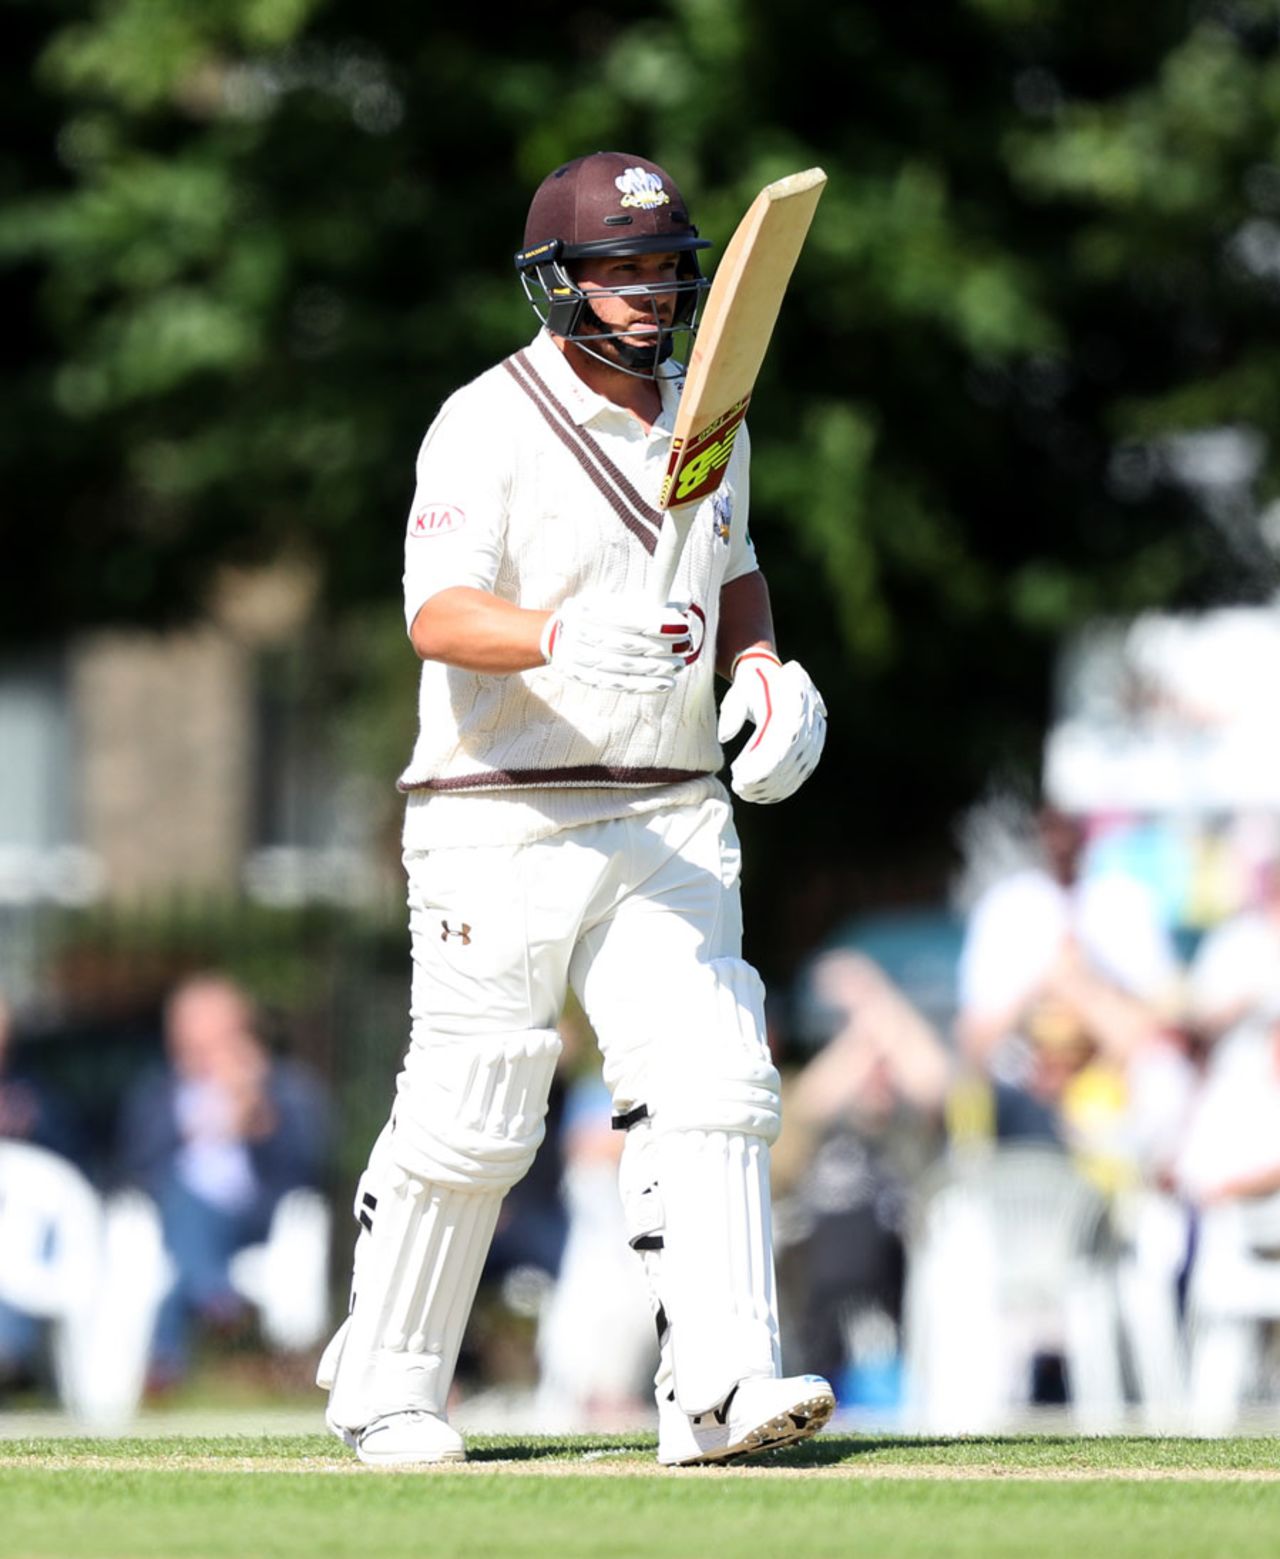 Aaron Finch celebrates his half-century, Surrey v Warwickshire, Specsavers County Championship, 1st day, Guildford, July 2, 2016